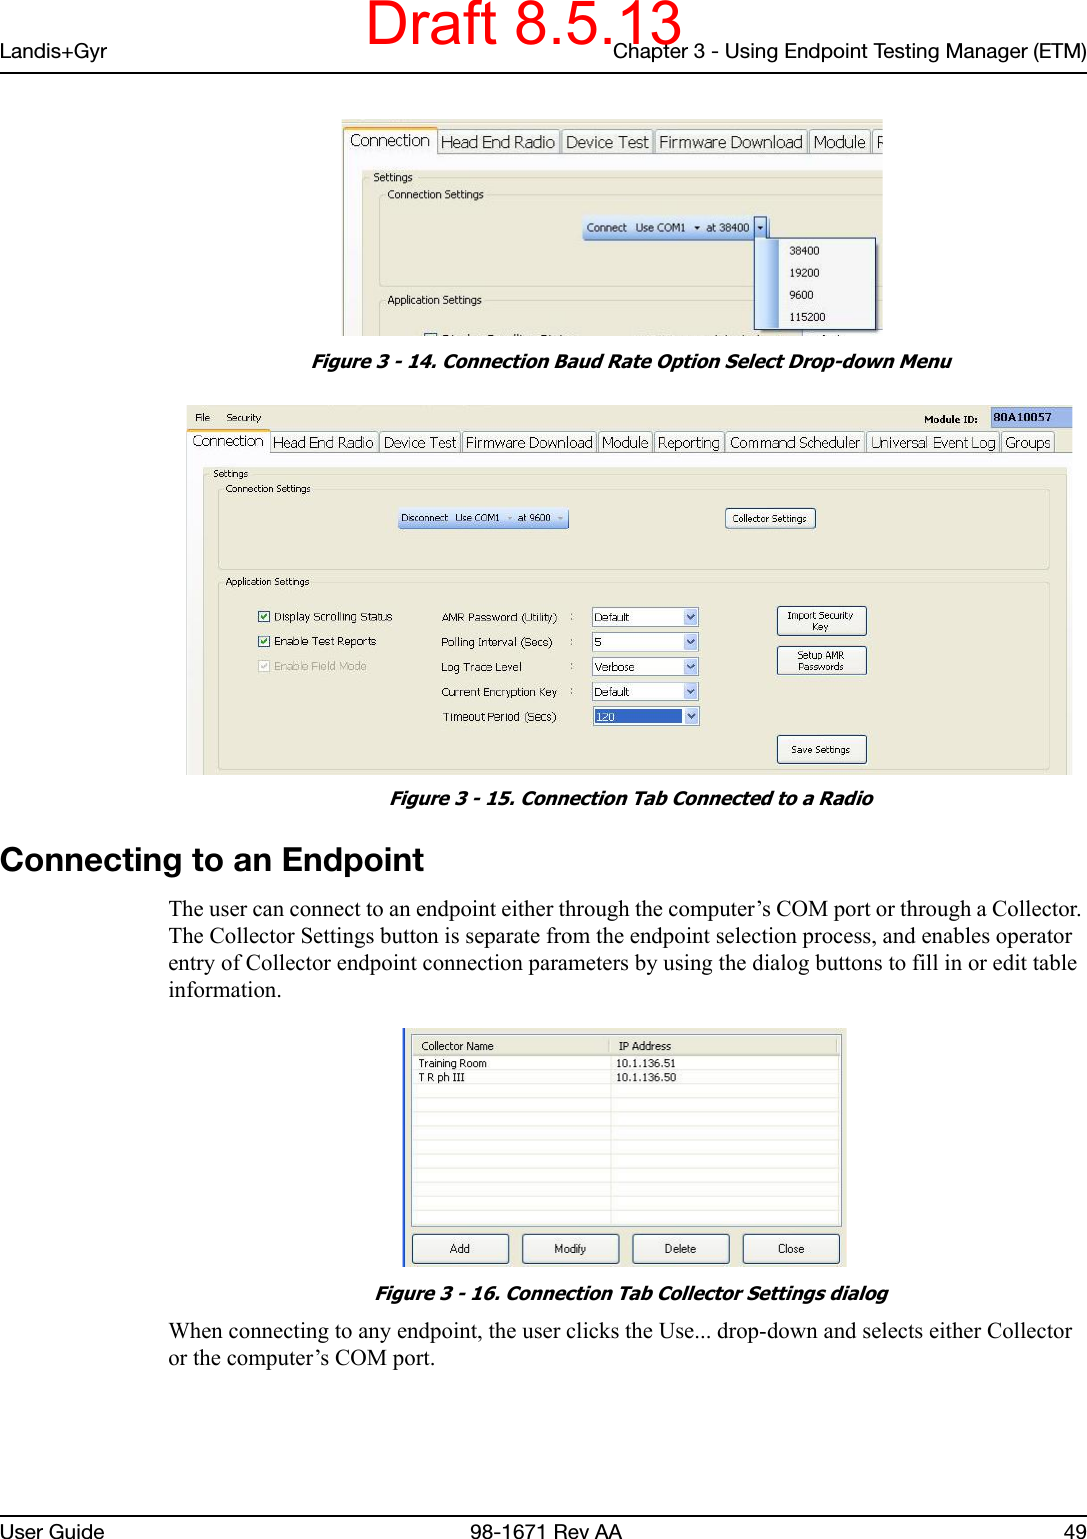 Landis+Gyr Chapter 3 - Using Endpoint Testing Manager (ETM)User Guide  98-1671 Rev AA 49 Figure 3 - 14. Connection Baud Rate Option Select Drop-down Menu Figure 3 - 15. Connection Tab Connected to a RadioConnecting to an EndpointThe user can connect to an endpoint either through the computer’s COM port or through a Collector. The Collector Settings button is separate from the endpoint selection process, and enables operator entry of Collector endpoint connection parameters by using the dialog buttons to fill in or edit table information. Figure 3 - 16. Connection Tab Collector Settings dialogWhen connecting to any endpoint, the user clicks the Use... drop-down and selects either Collector or the computer’s COM port.Draft 8.5.13